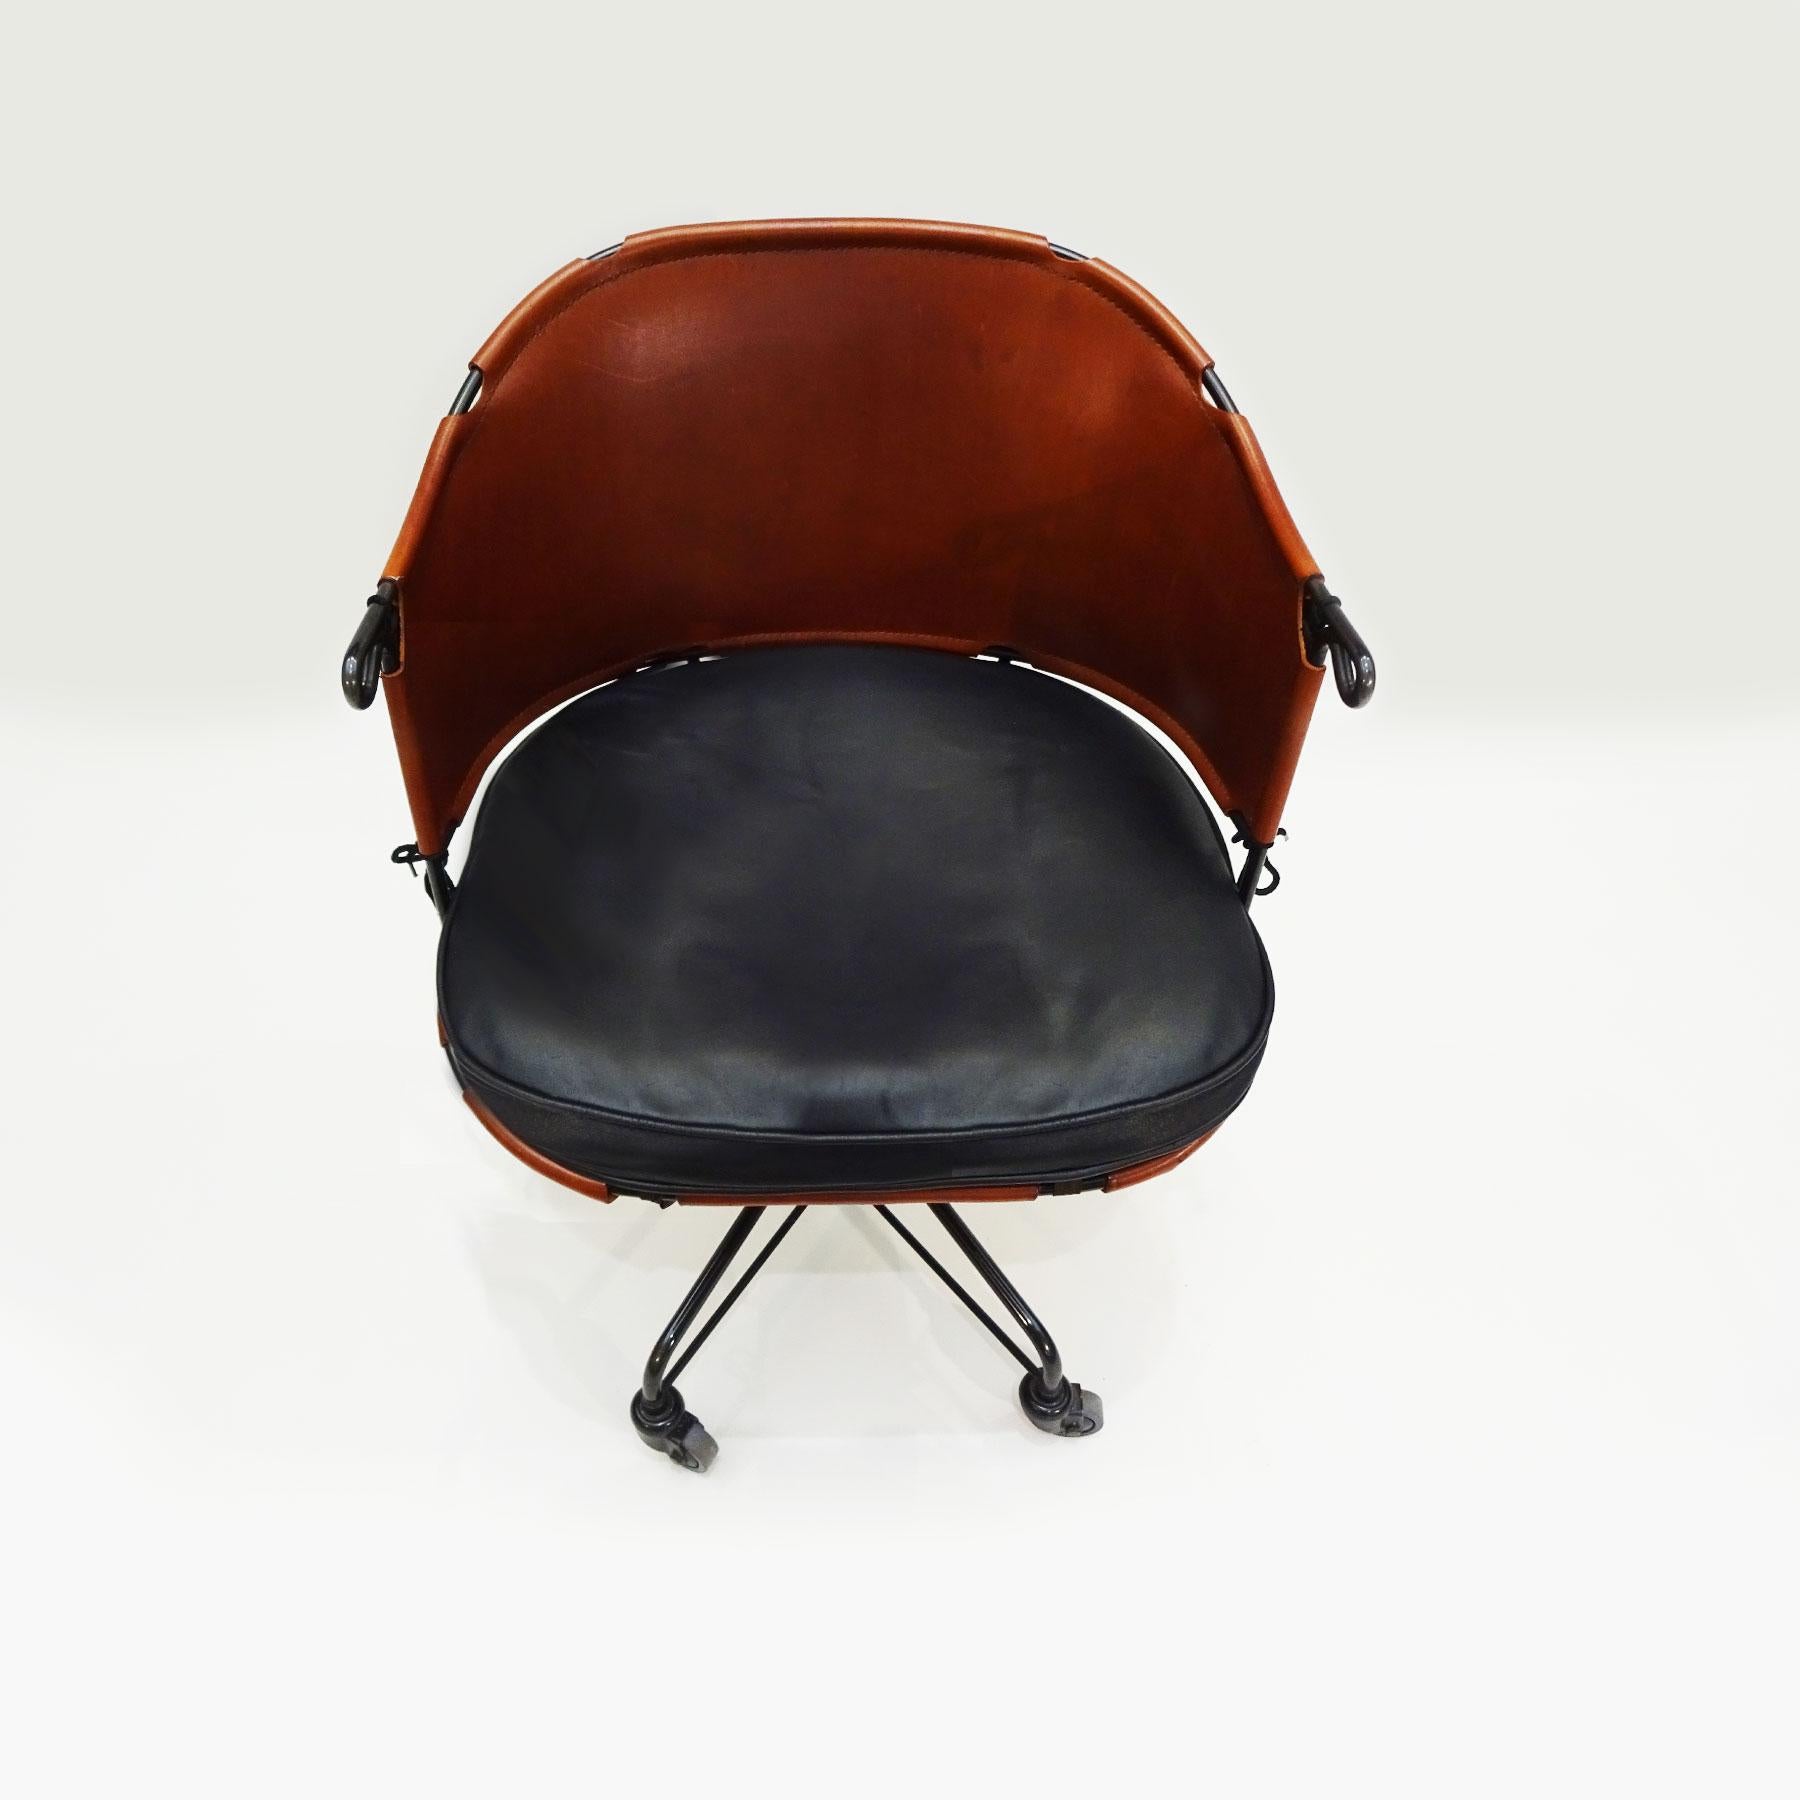 Modern Leather and Steel Scandinavian Desk Chair by Mats Theselius for Källemo